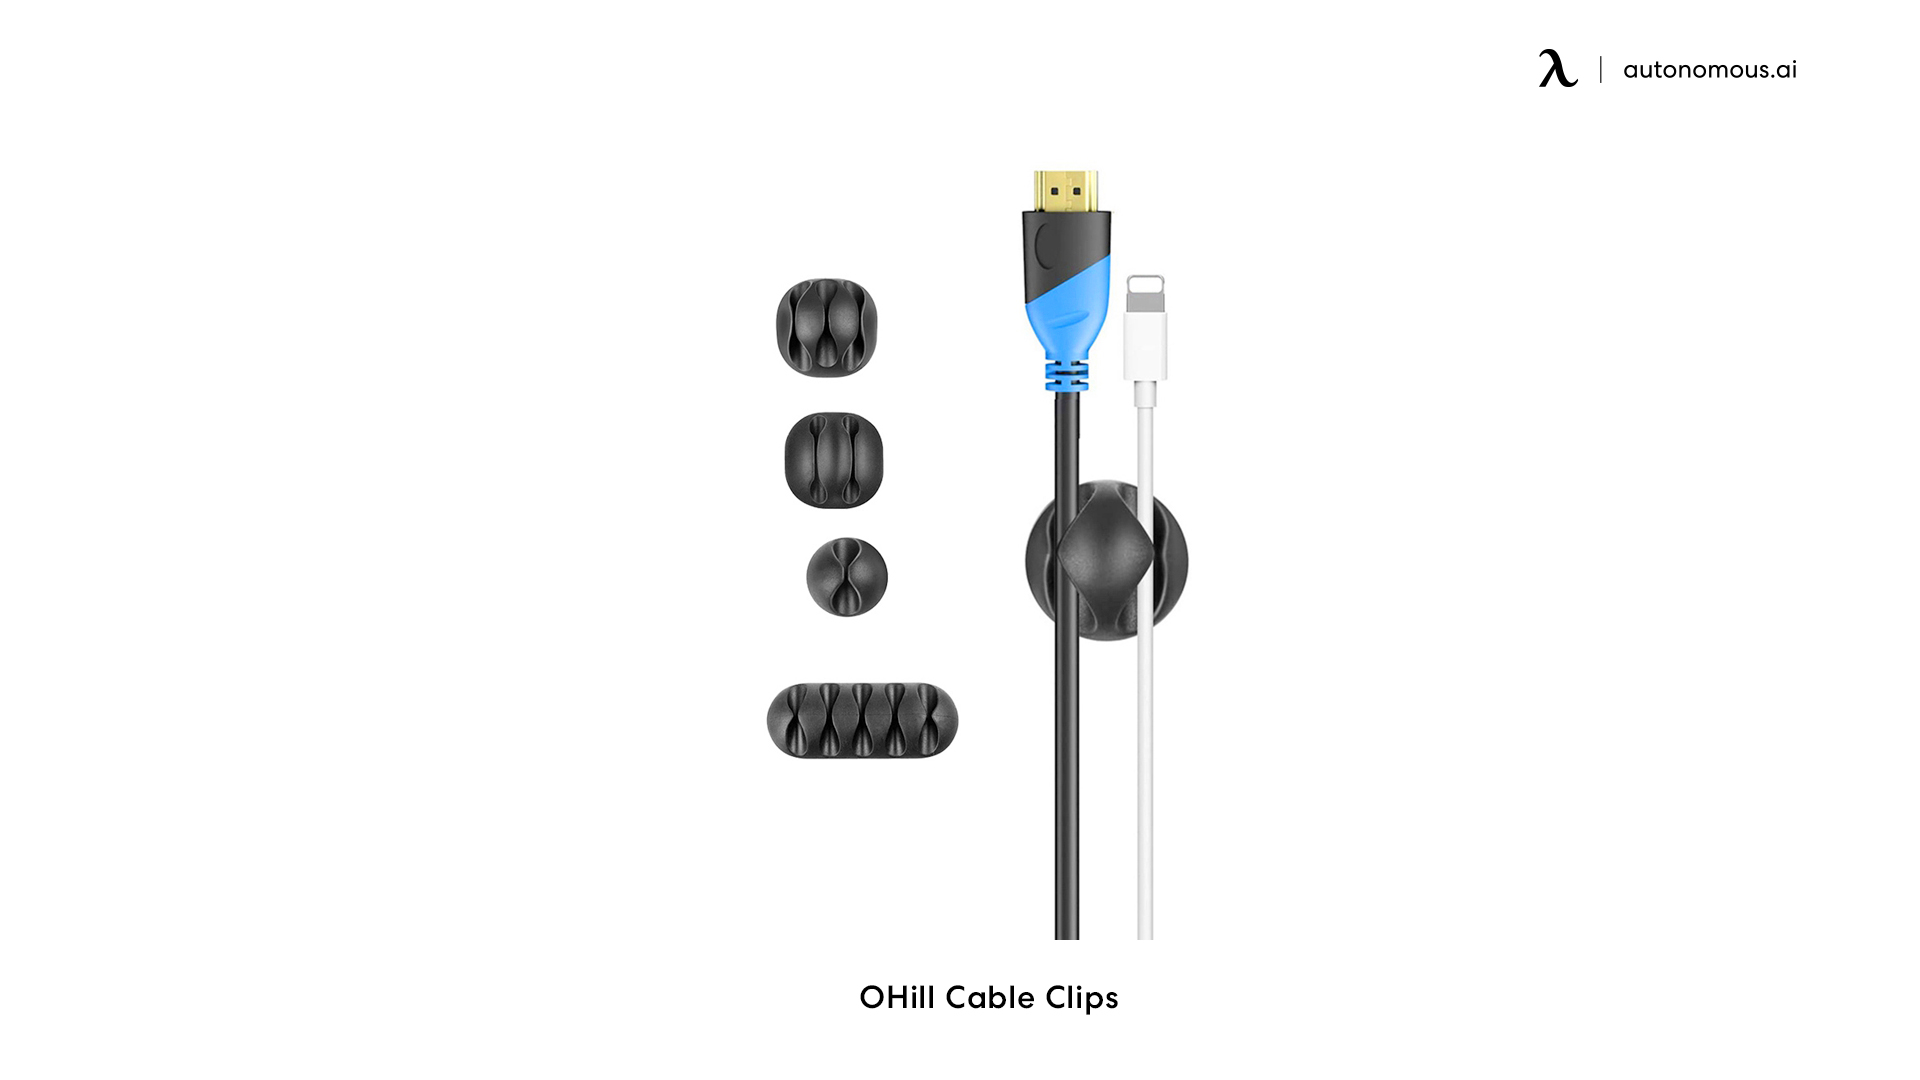 OHill Cable Clips